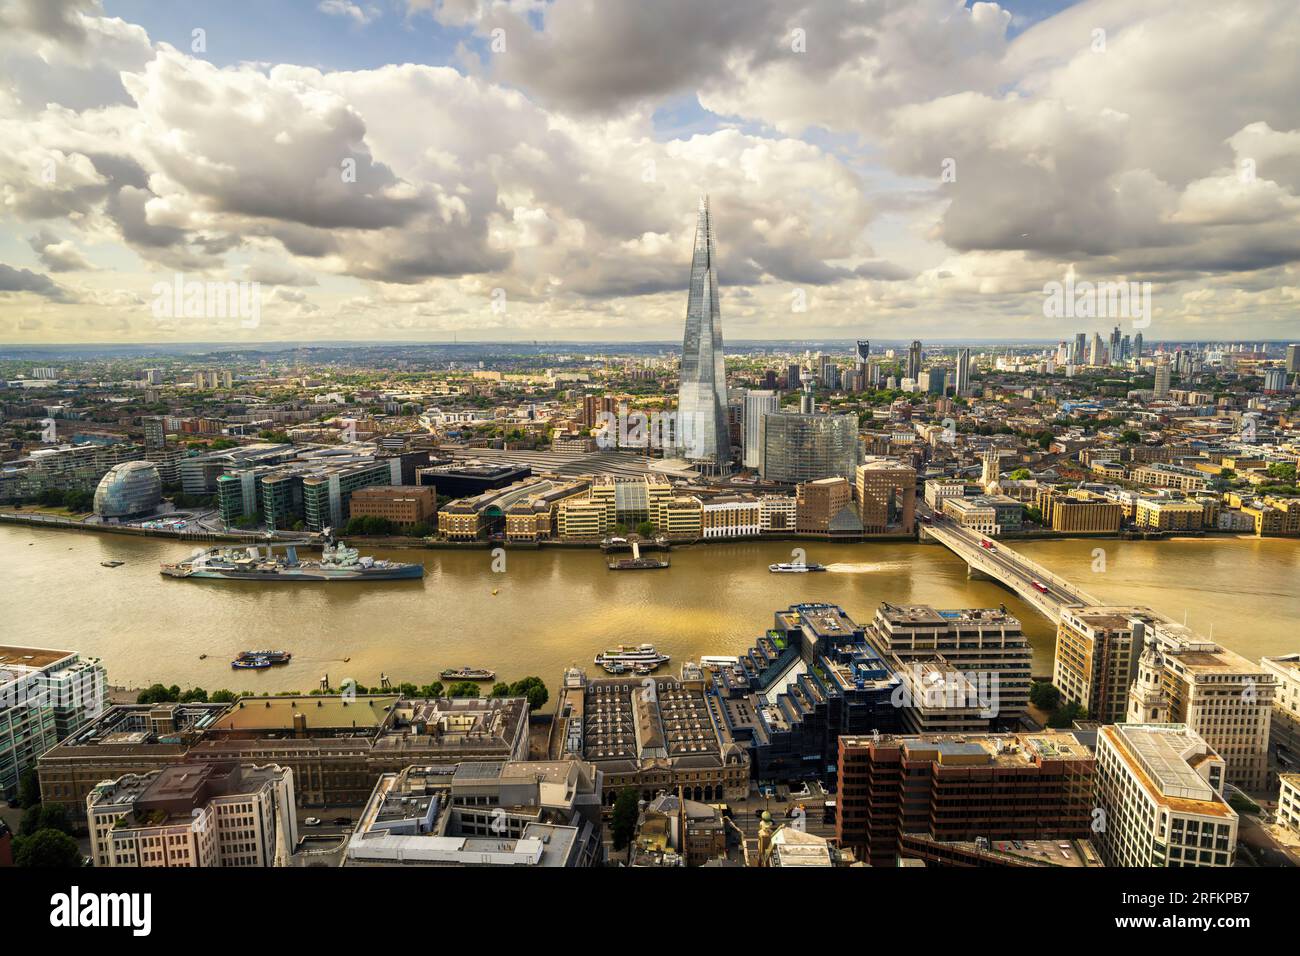 London skyline panoramic view over the River Thames and London Bridge. Urban cityscape reflects city life and shows the diverse landmarks, major sites Stock Photo